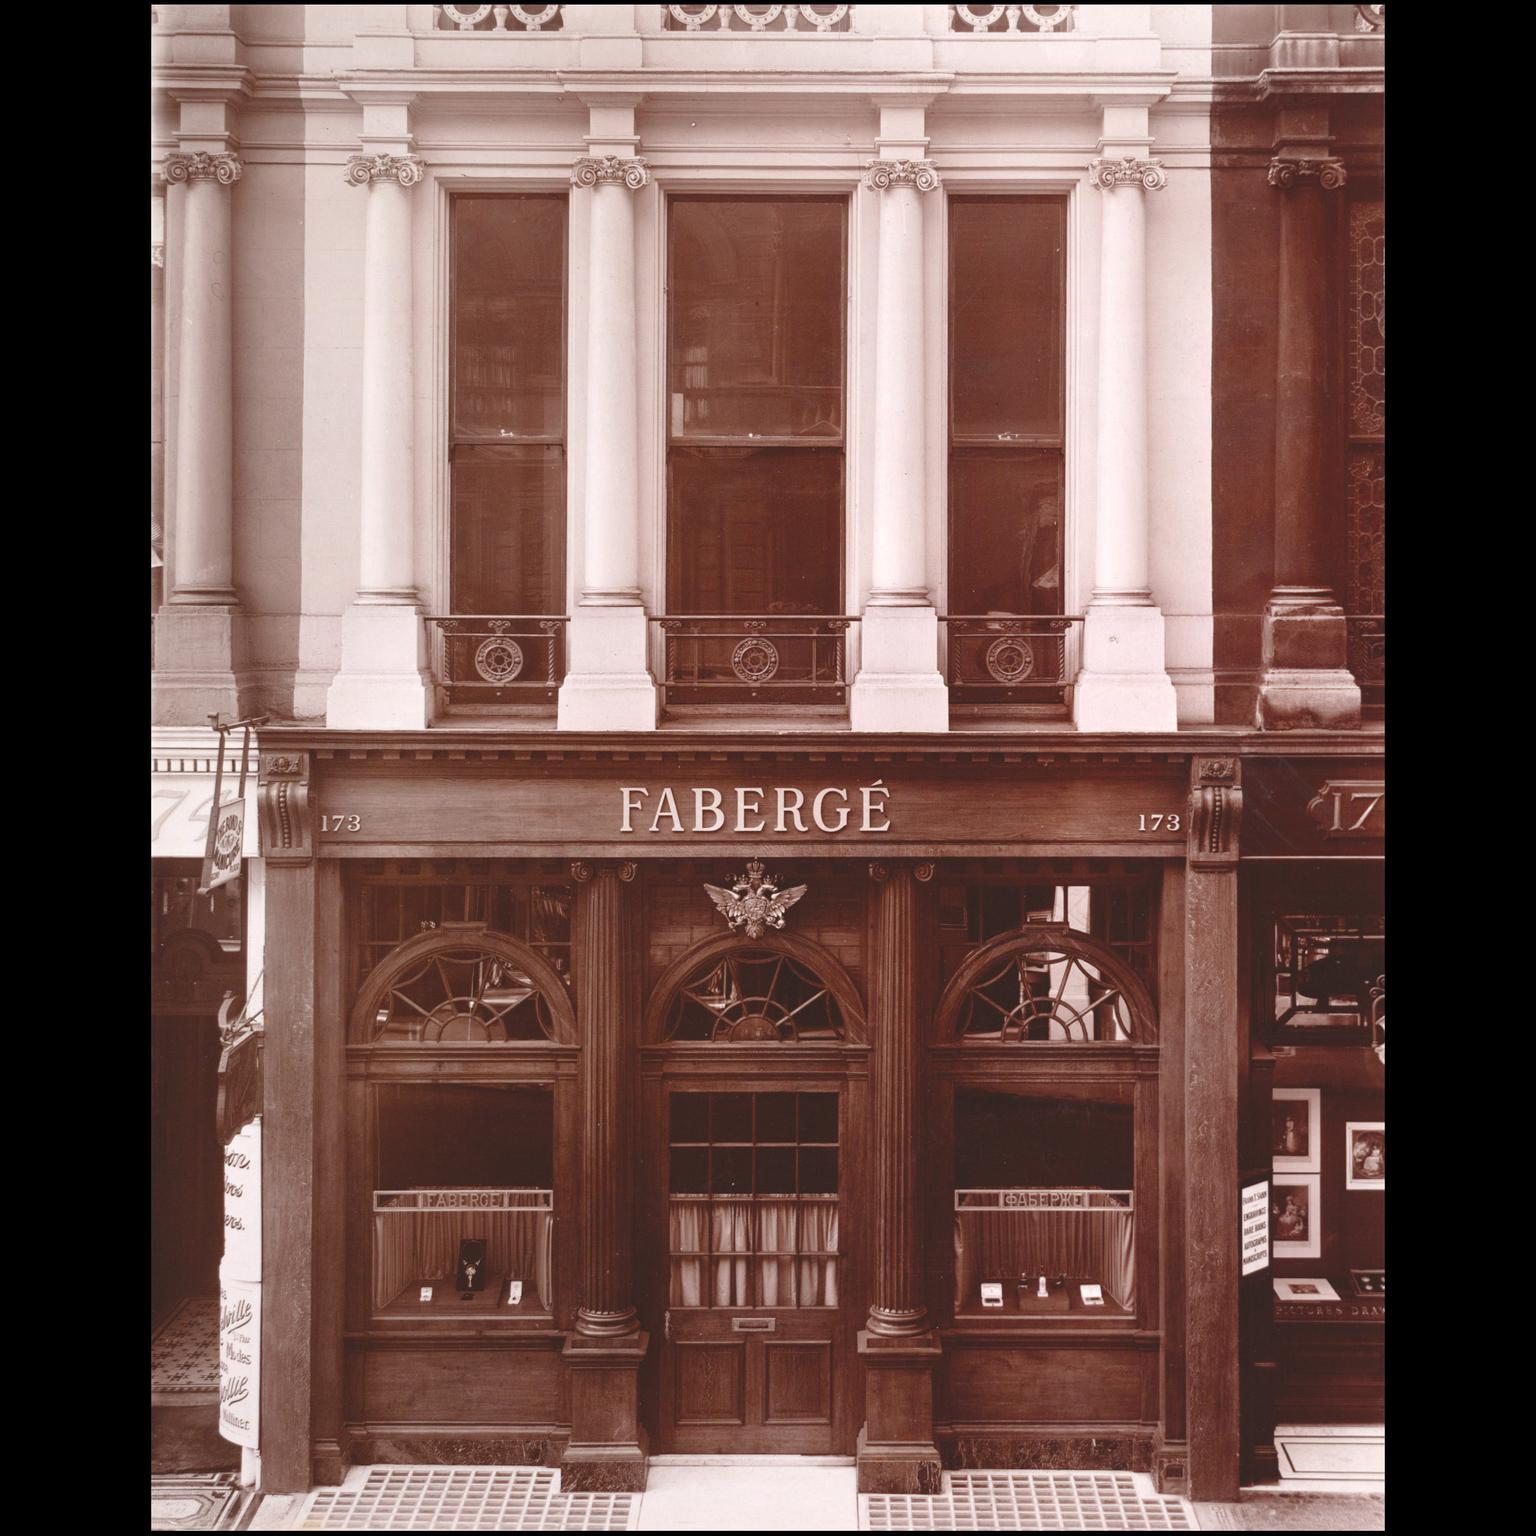 Fabergé's premises at 173 New Bond Street in 1911. Image Courtesy of The Fersman Mineralogical Museum, Moscow and Wartski, London